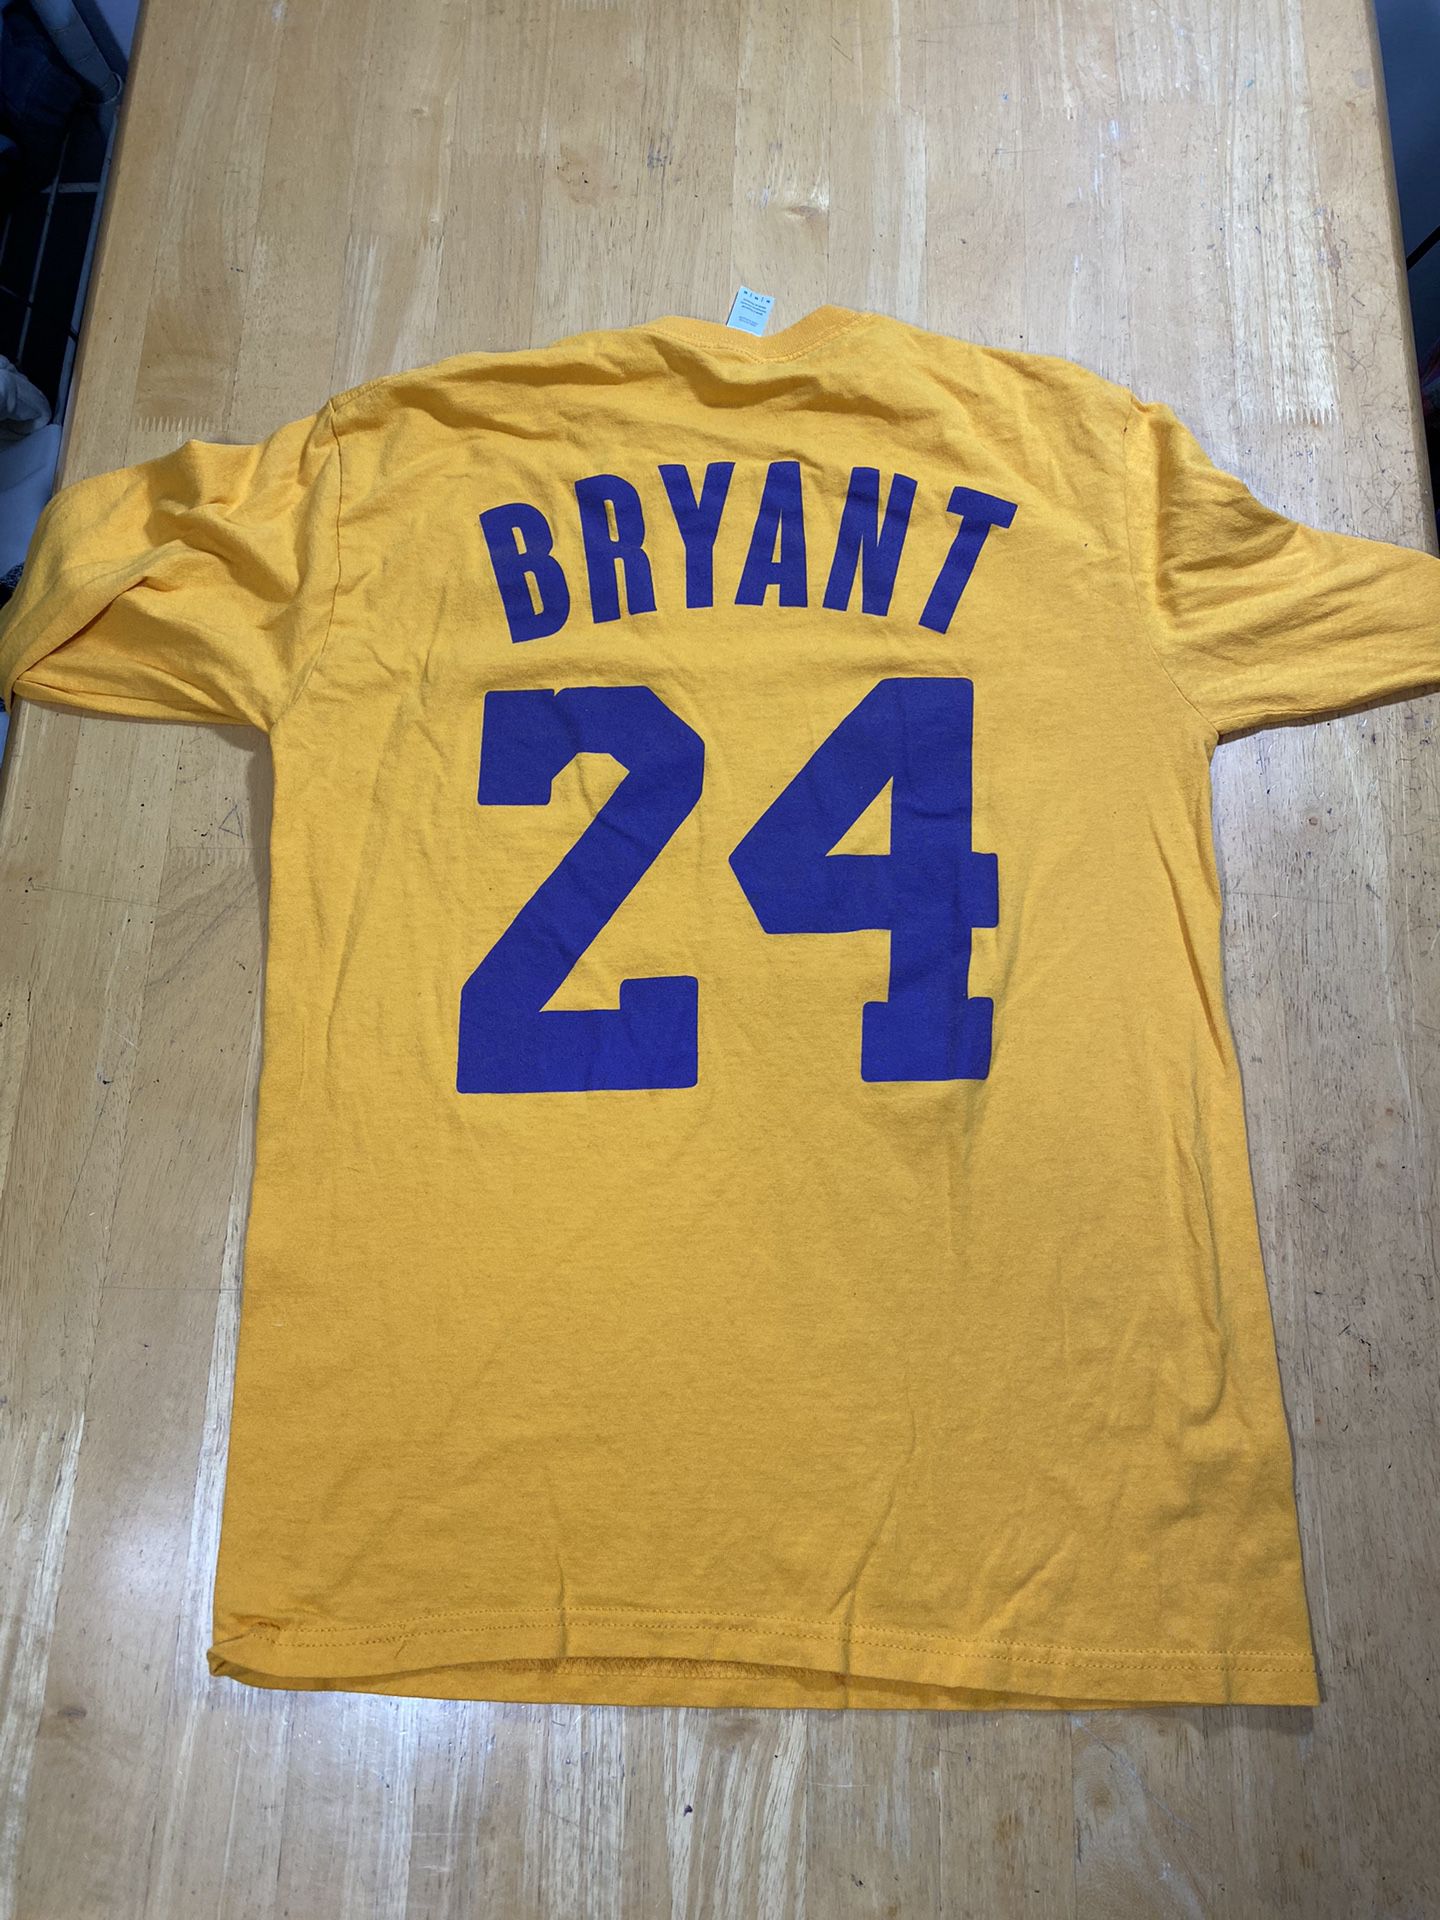 Kobe Bryant 1(contact info removed) Los Angeles Lakers Jersey Long Sleeve Shirt SZ M 18pit2pit